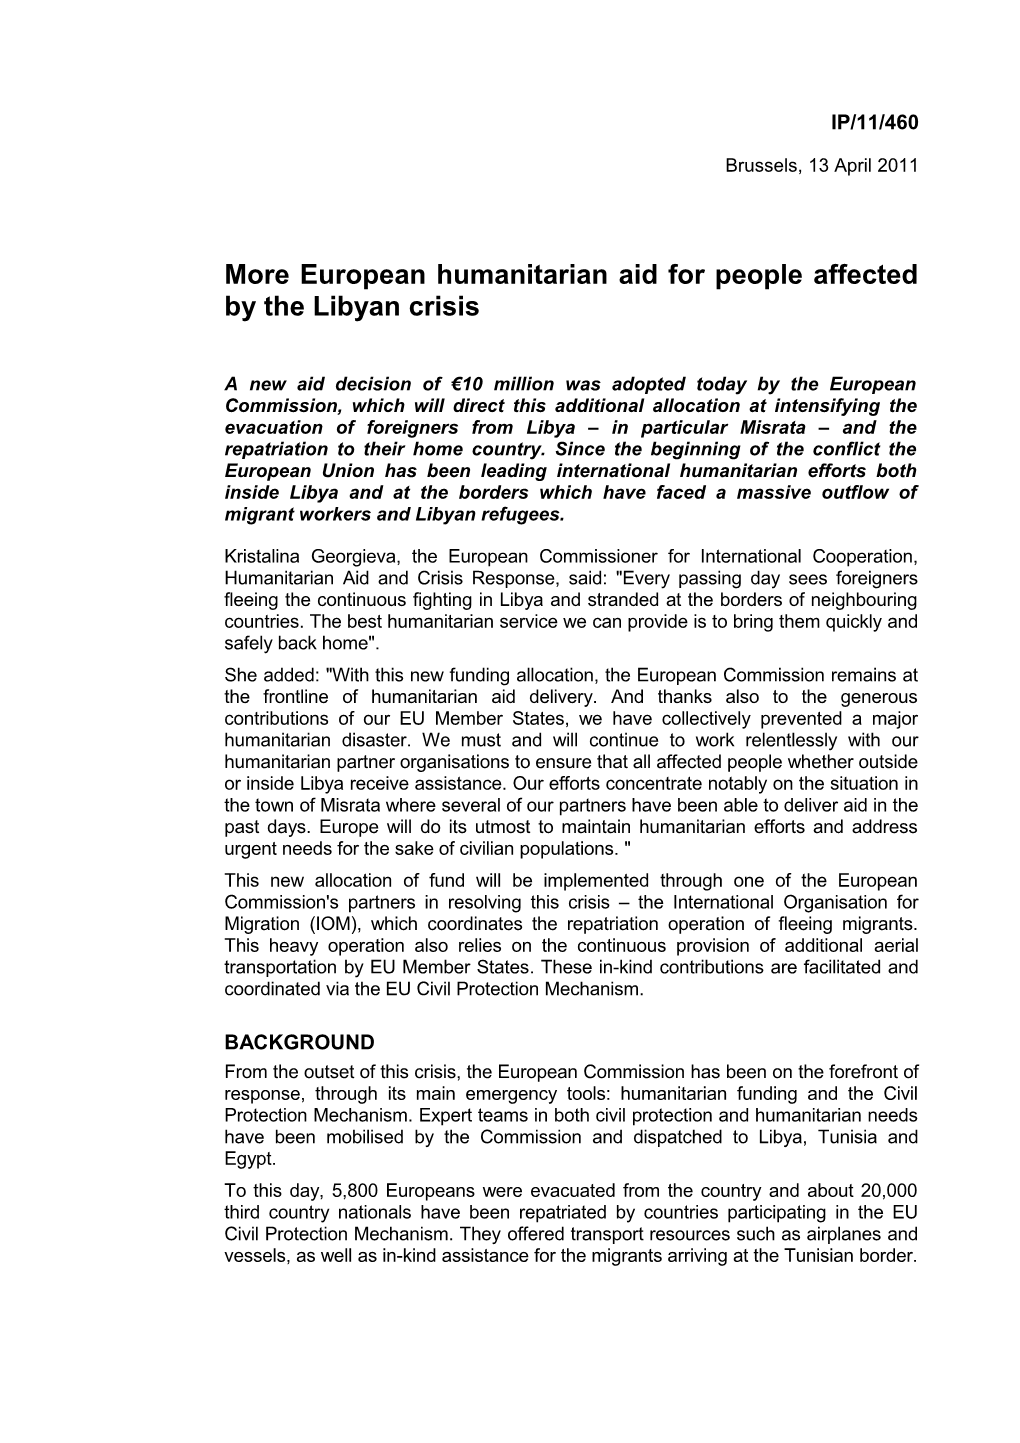 More European Humanitarian Aid for People Affected by the Libyan Crisis